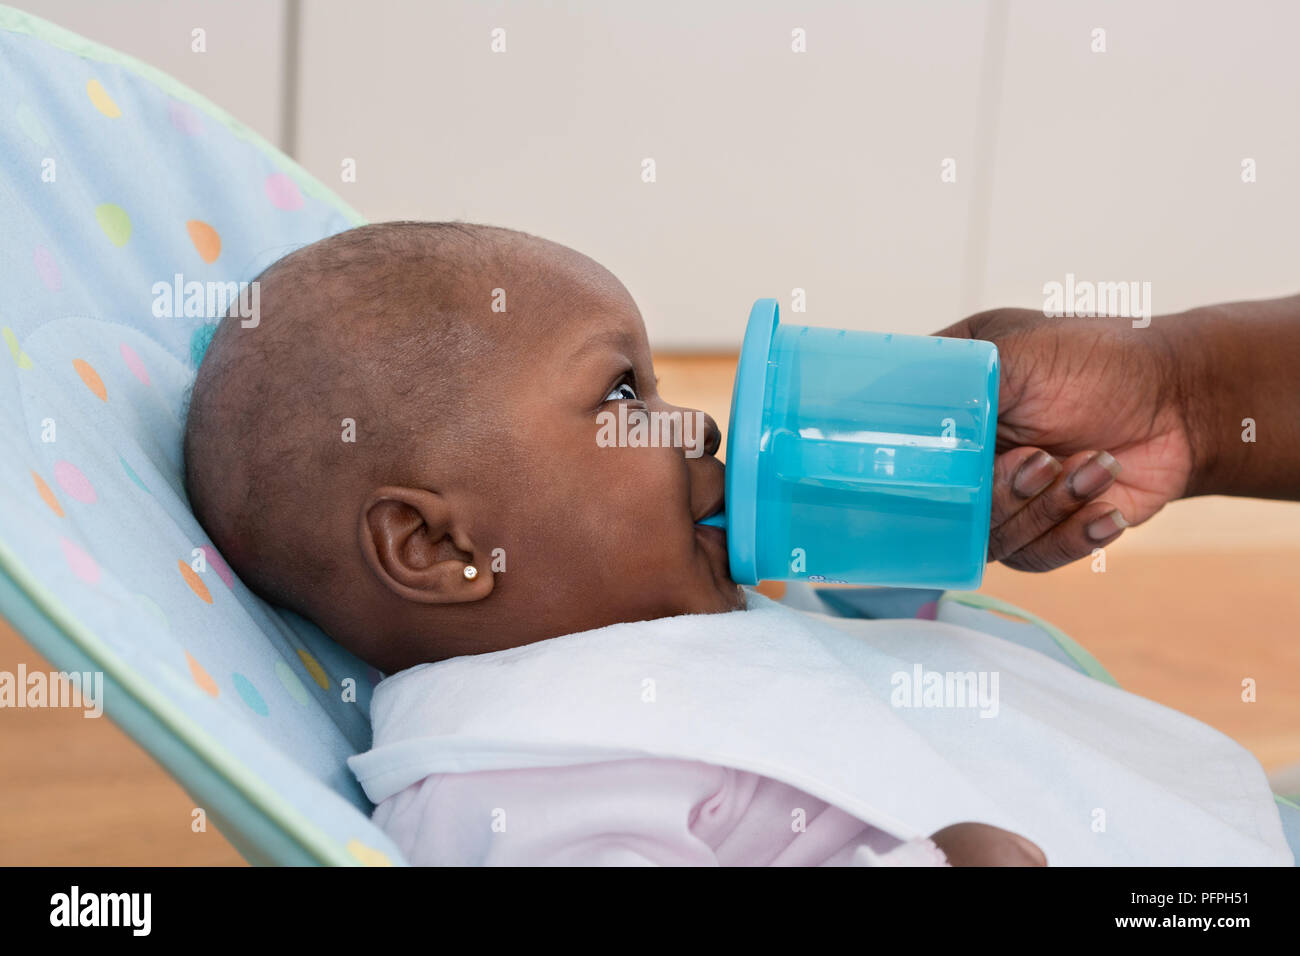 Baby girl in soft seat being fed drink from plastic cup, close-up Stock Photo